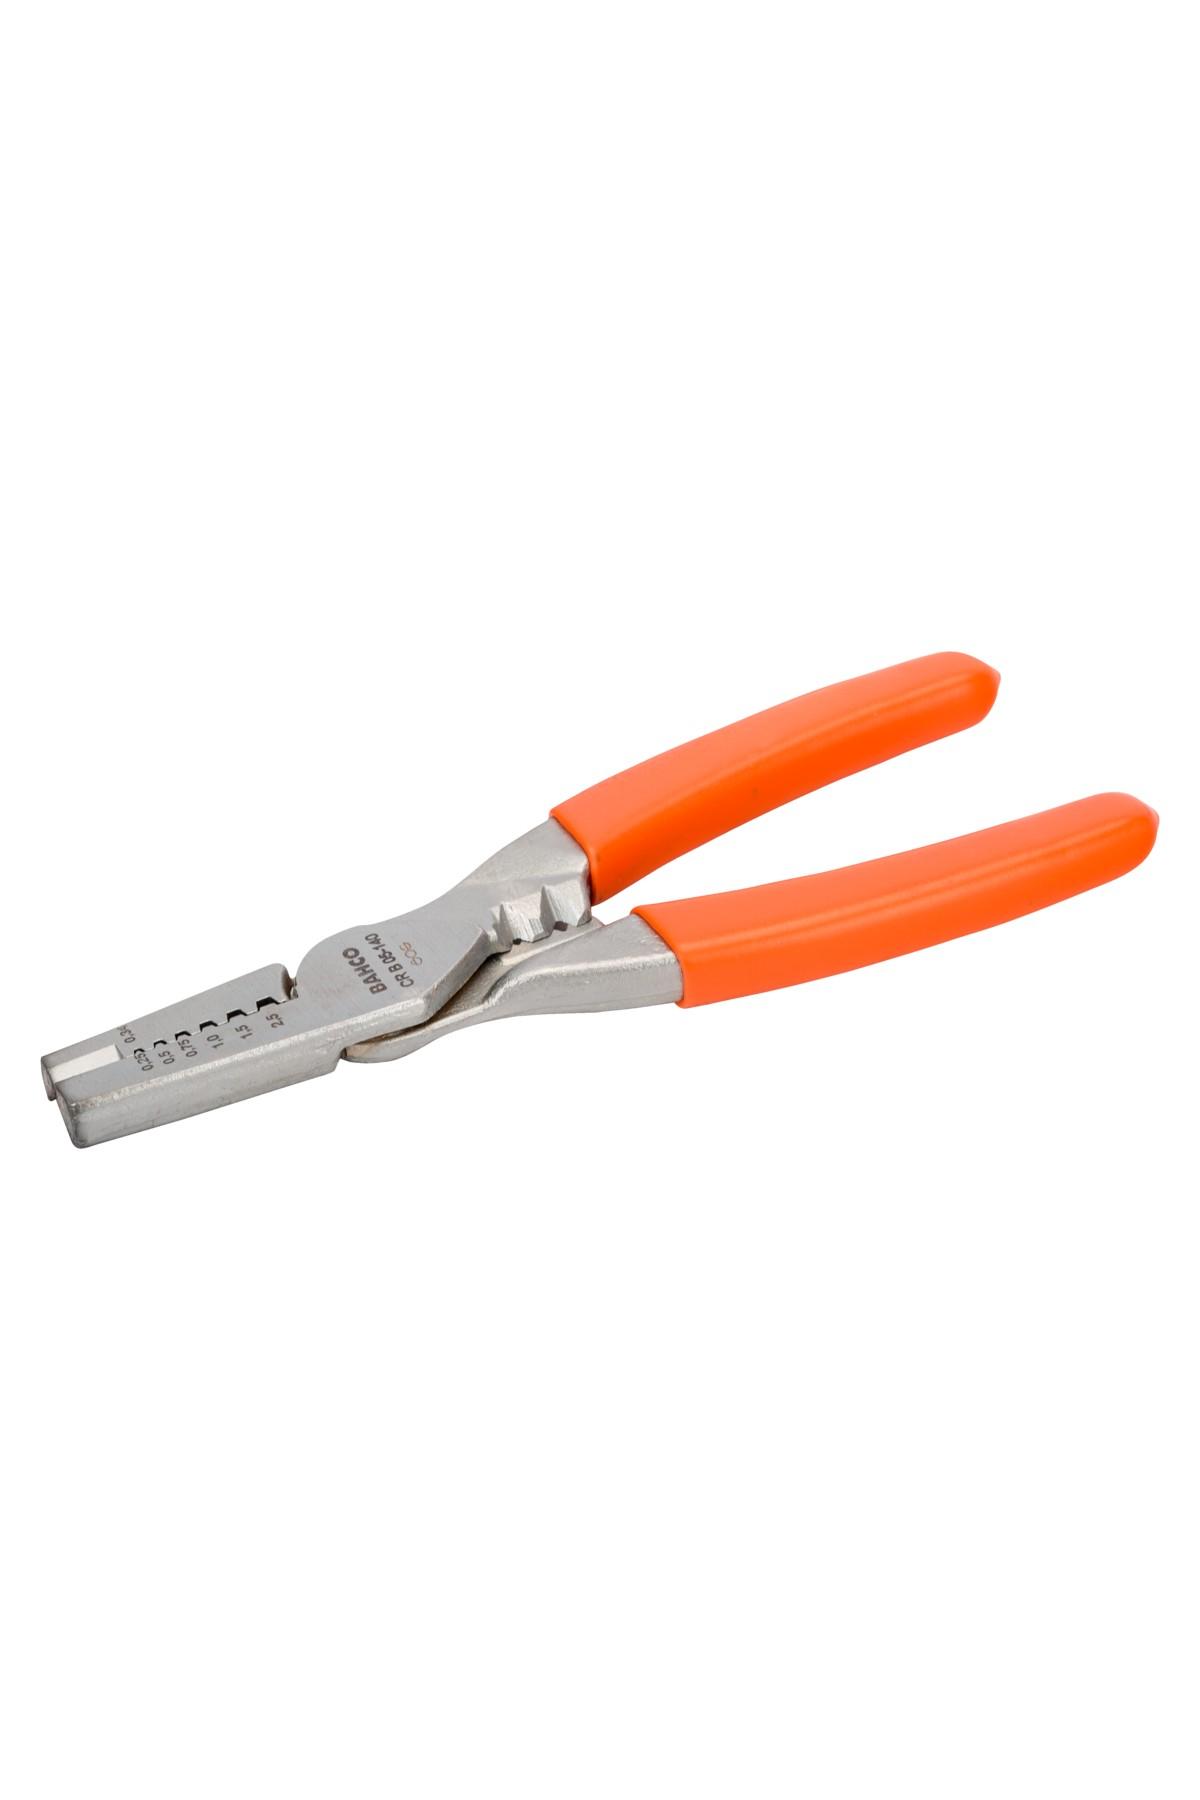 Crimping pliers for cable connectors 0.5-2.5 mm